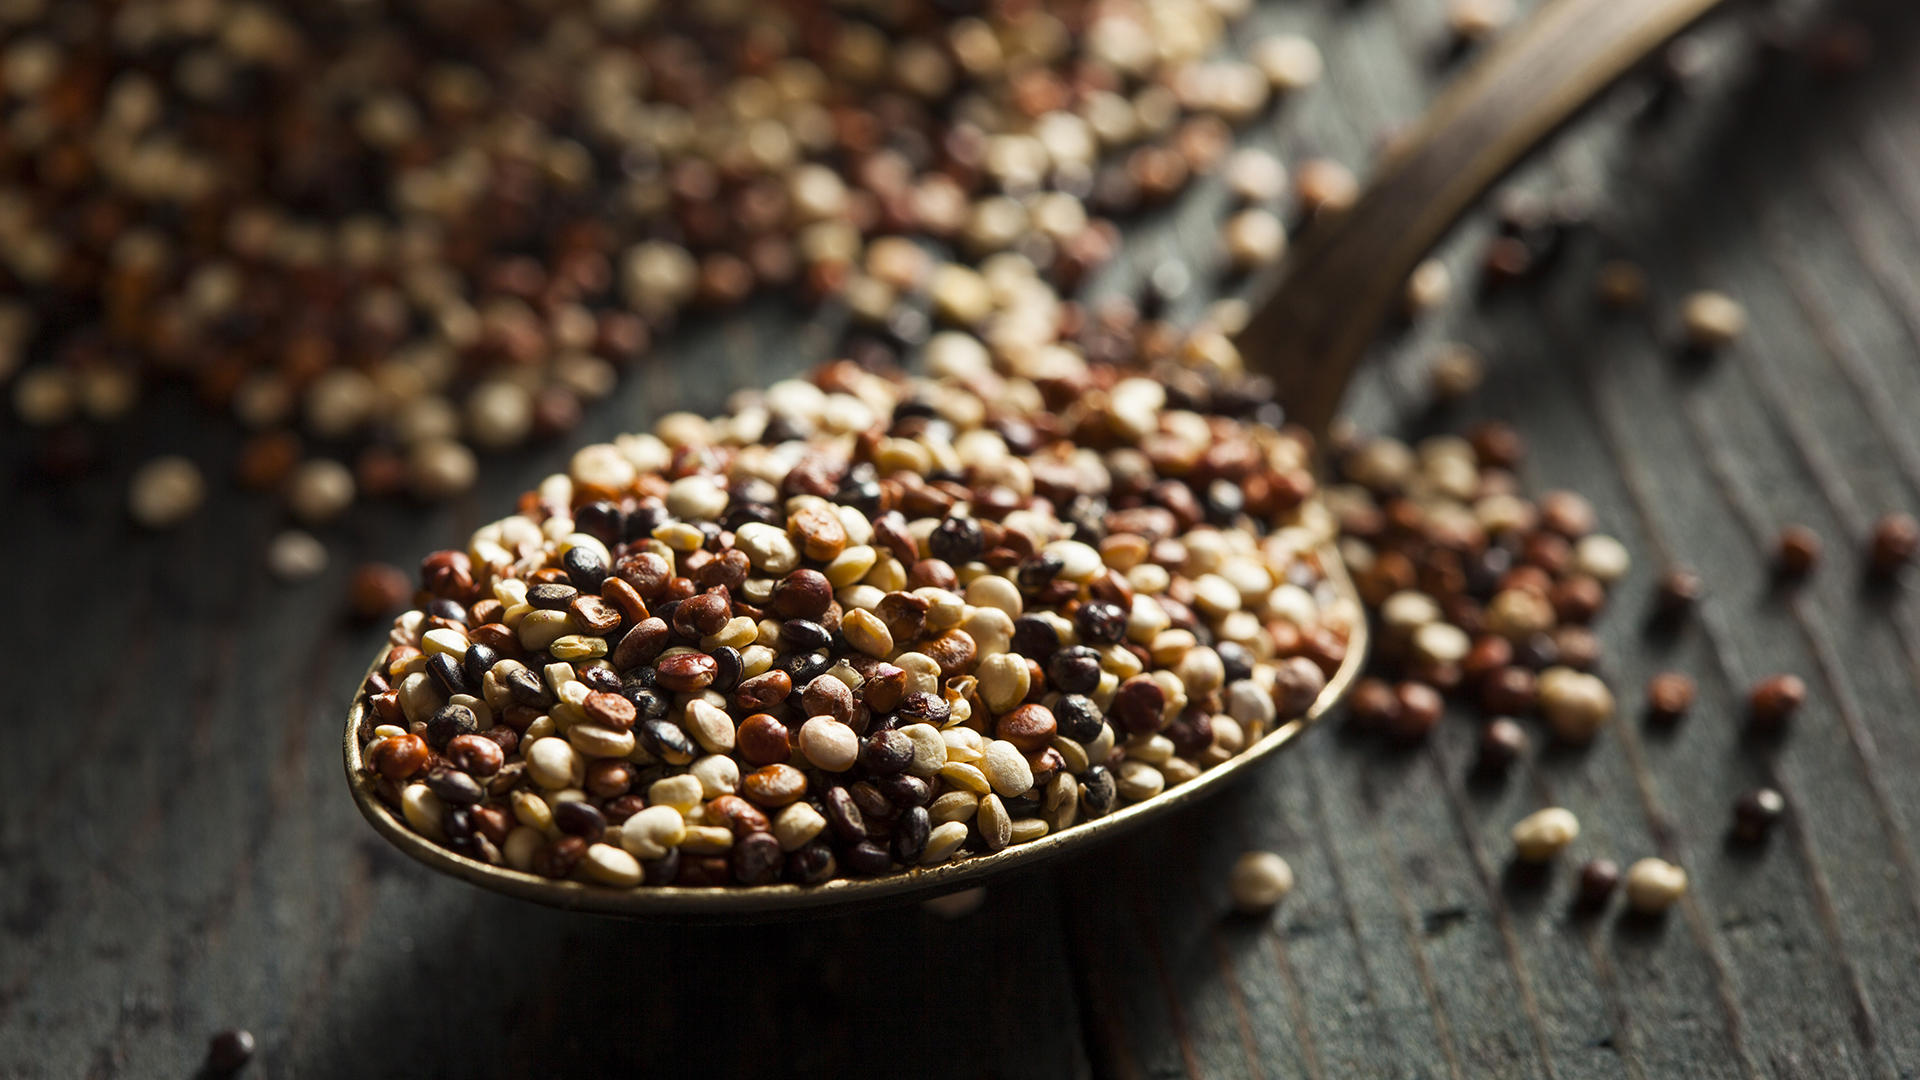 In addition to having optimal nutritional conditions for those who are, quinoa has a neutral flavor that can fit perfectly into salads, stews, desserts or breakfasts (Getty).